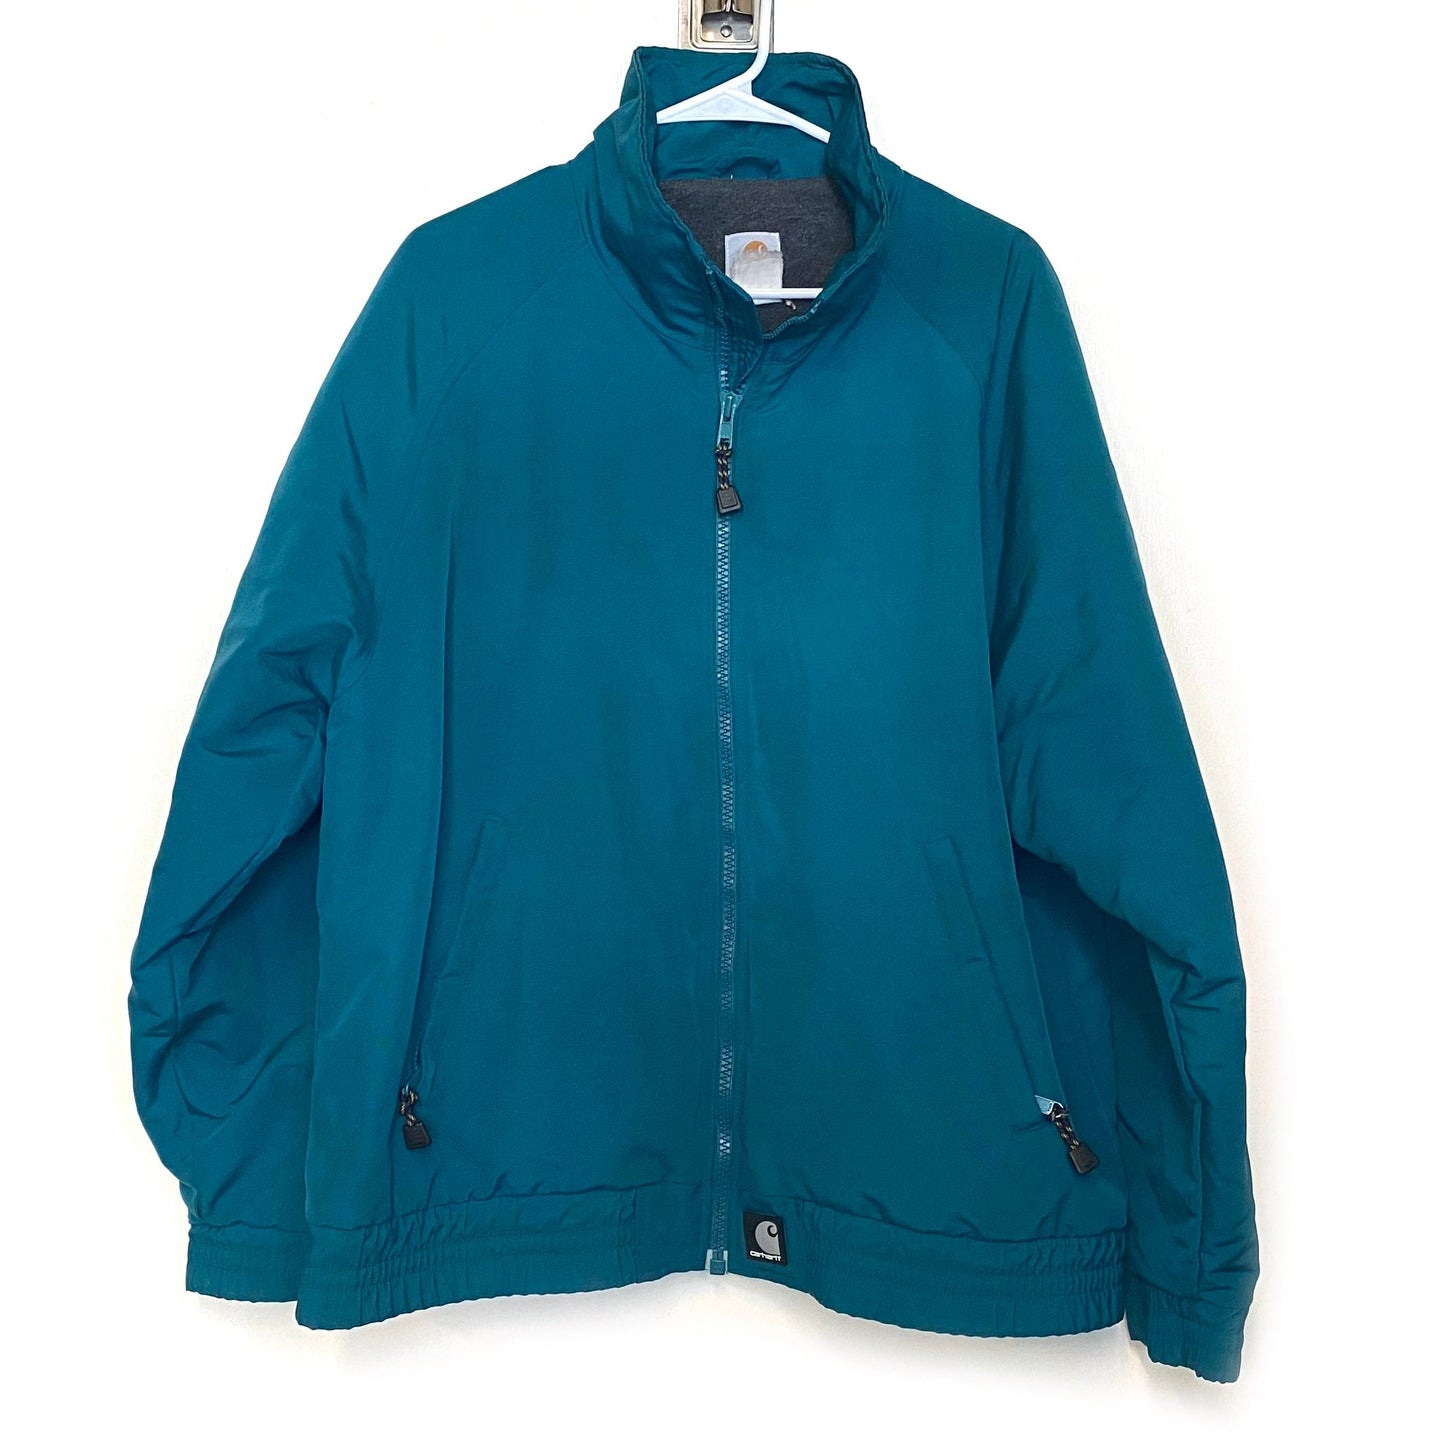 Vintage Carhartt J72 Workshield Squall Jacket - Fleece Lined, 2XL Teal Green L/s Pre-Owned